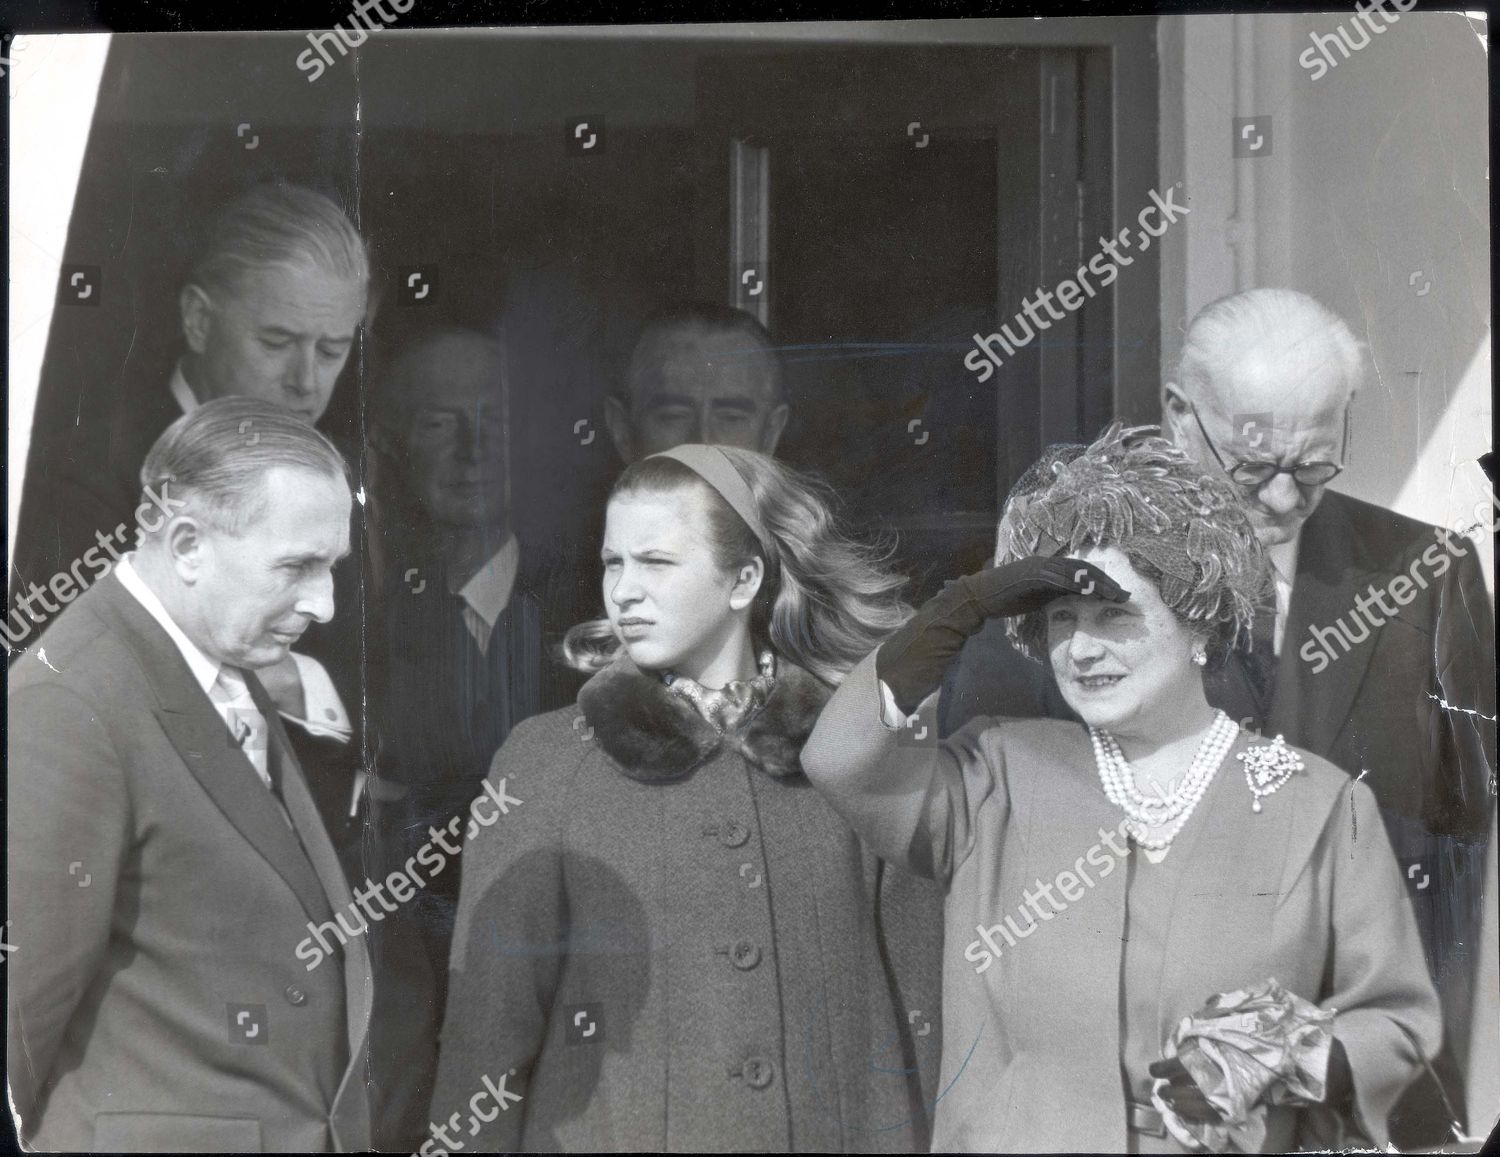 queen-elizabeth-queen-mother-1963-28-march-1963-it-was-only-ten-minutes-but-it-seemed-like-an-age-for-princess-anne-now-princess-royal-as-she-waited-for-the-queen-elizabeth-ii-to-come-home-yesterday-she-stood-with-the-queen-mother-at-the-e-shutterstock-editorial-894274a.jpg